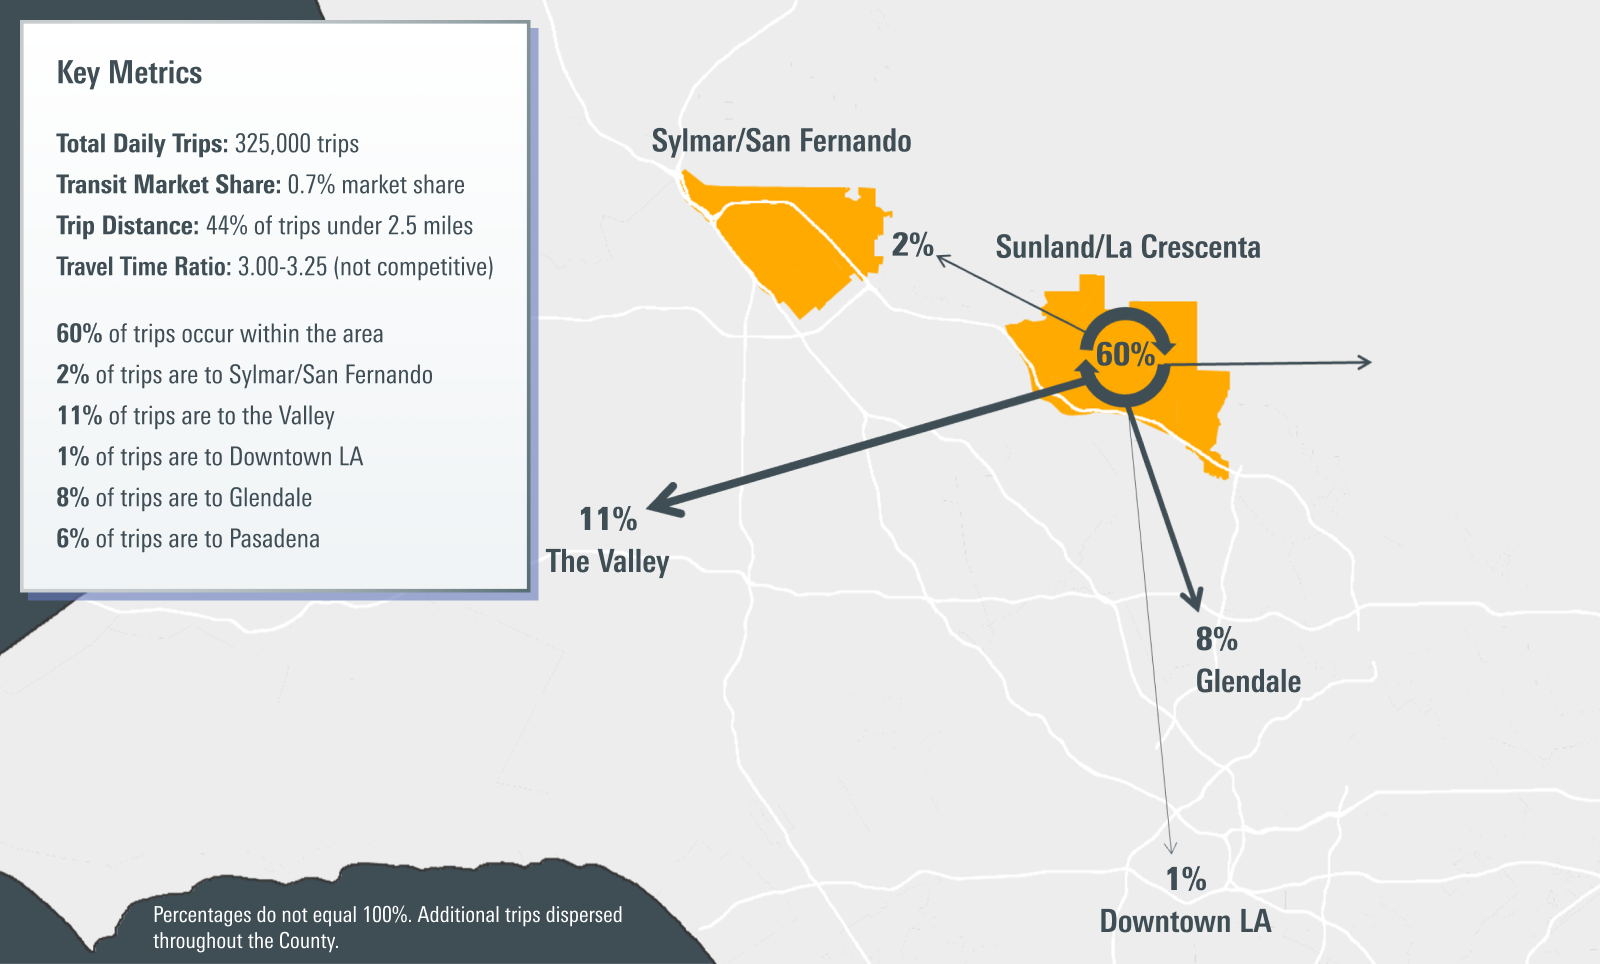 <p>Few trips are destined for Downtown Los Angeles from these regions, while a substantial number of journeys are directed west to the Valley/North Hollywood region. Both areas exhibit below-average transit market shares and lack competitive travel times. </p>